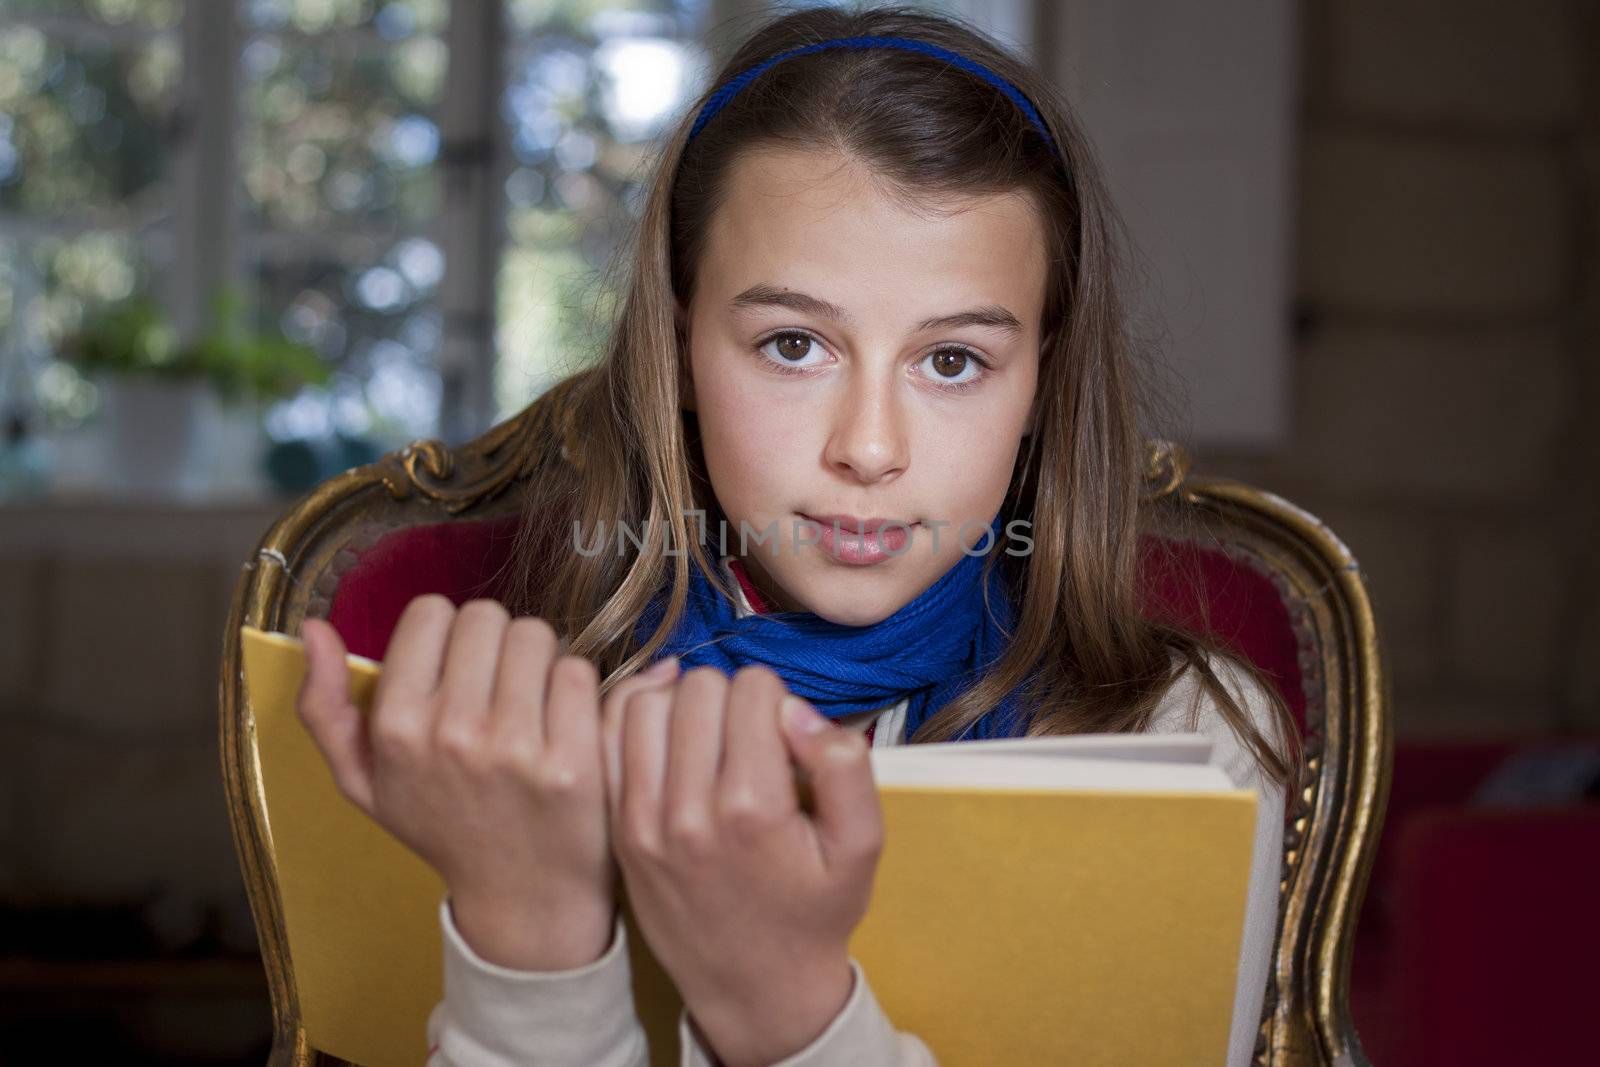 A young girl holding up a book, looking at camera, Real people, candid shot